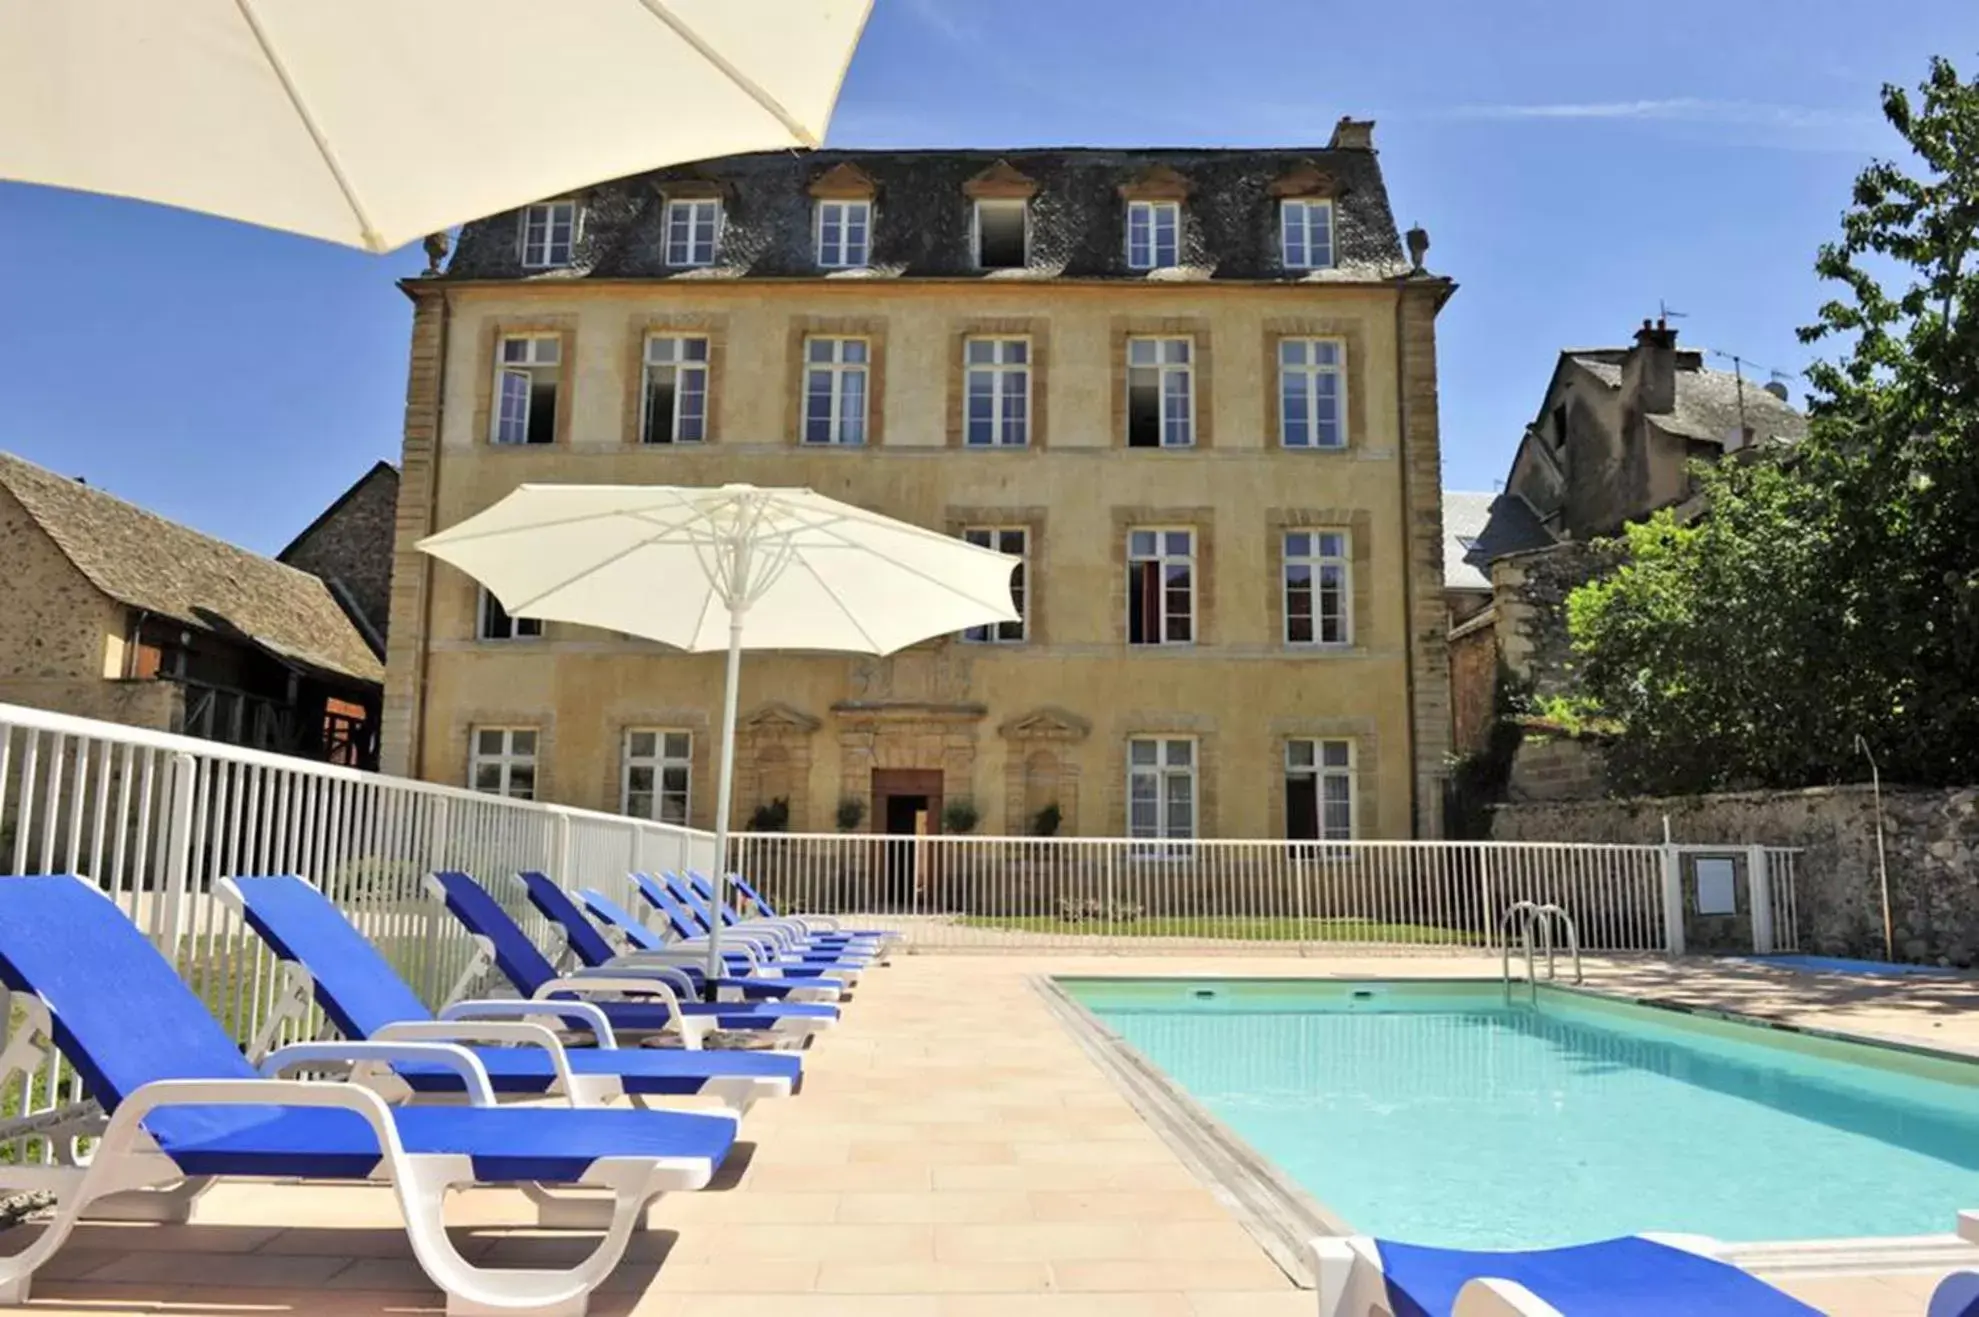 Property building, Swimming Pool in Chateau Ricard